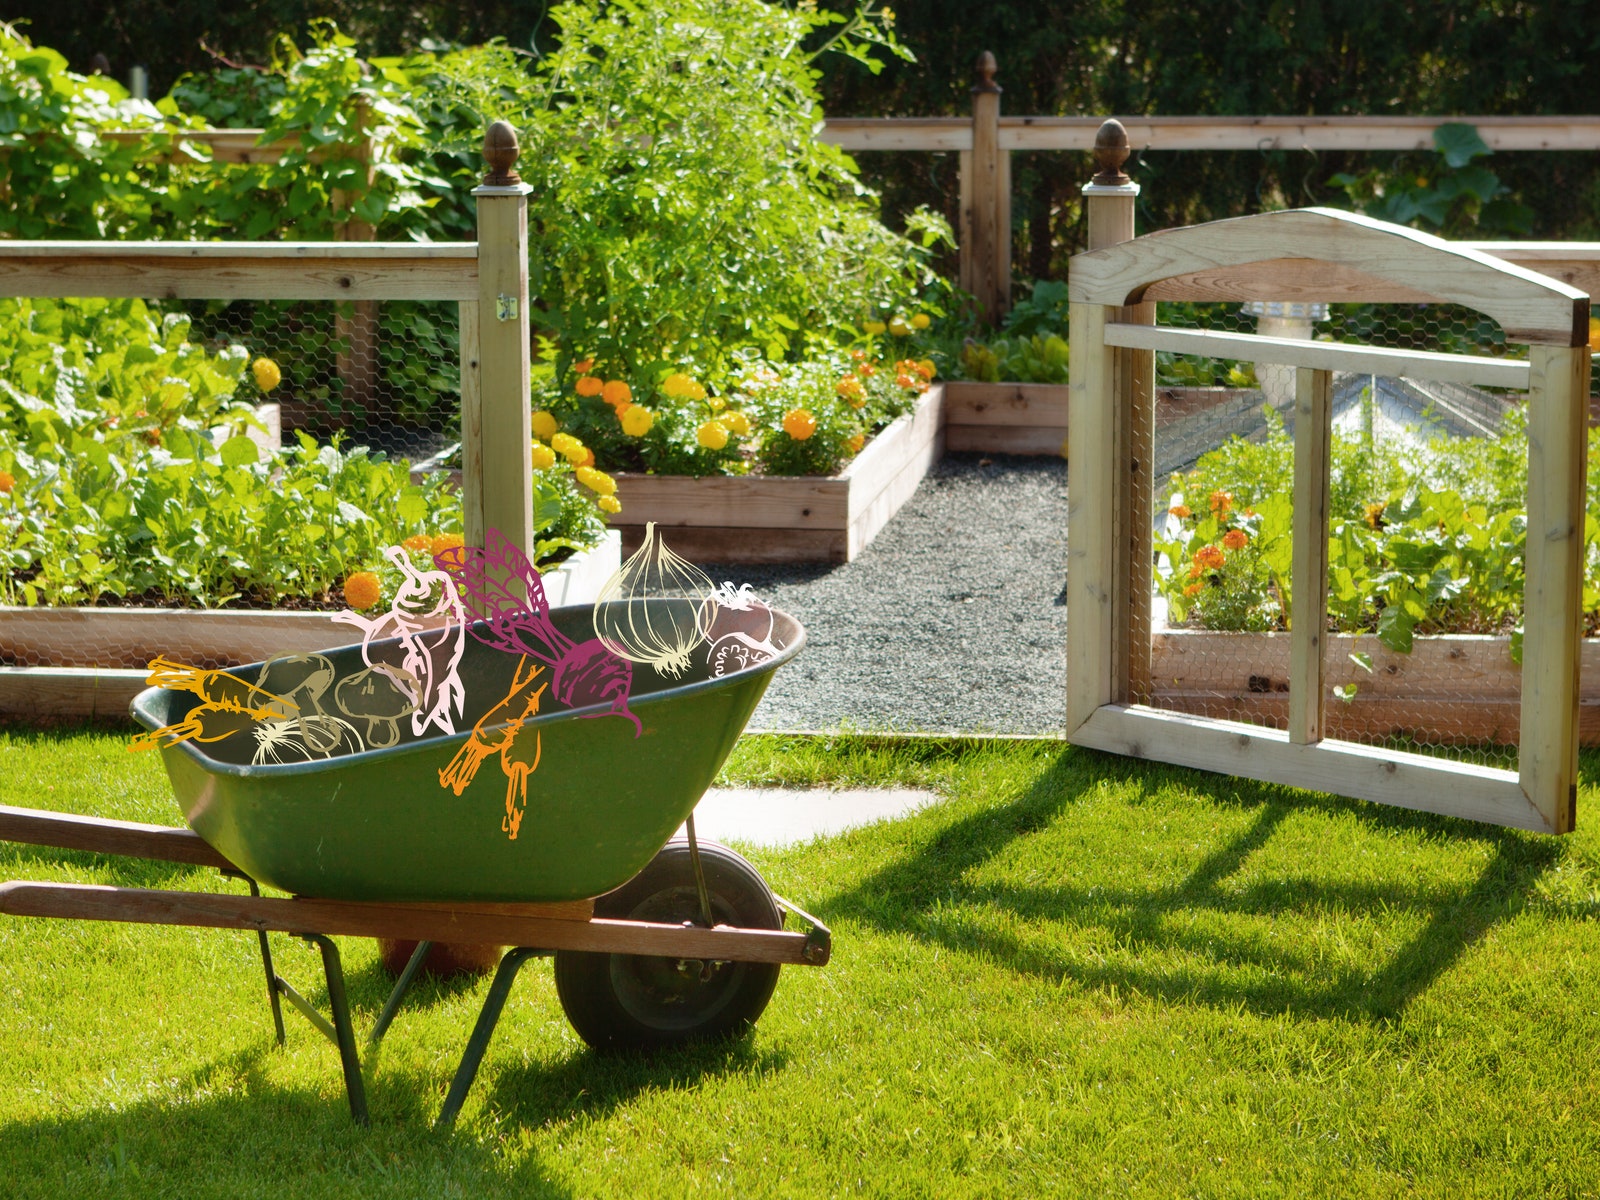 Green thumb or not starting a vegetable garden is easier than you think.